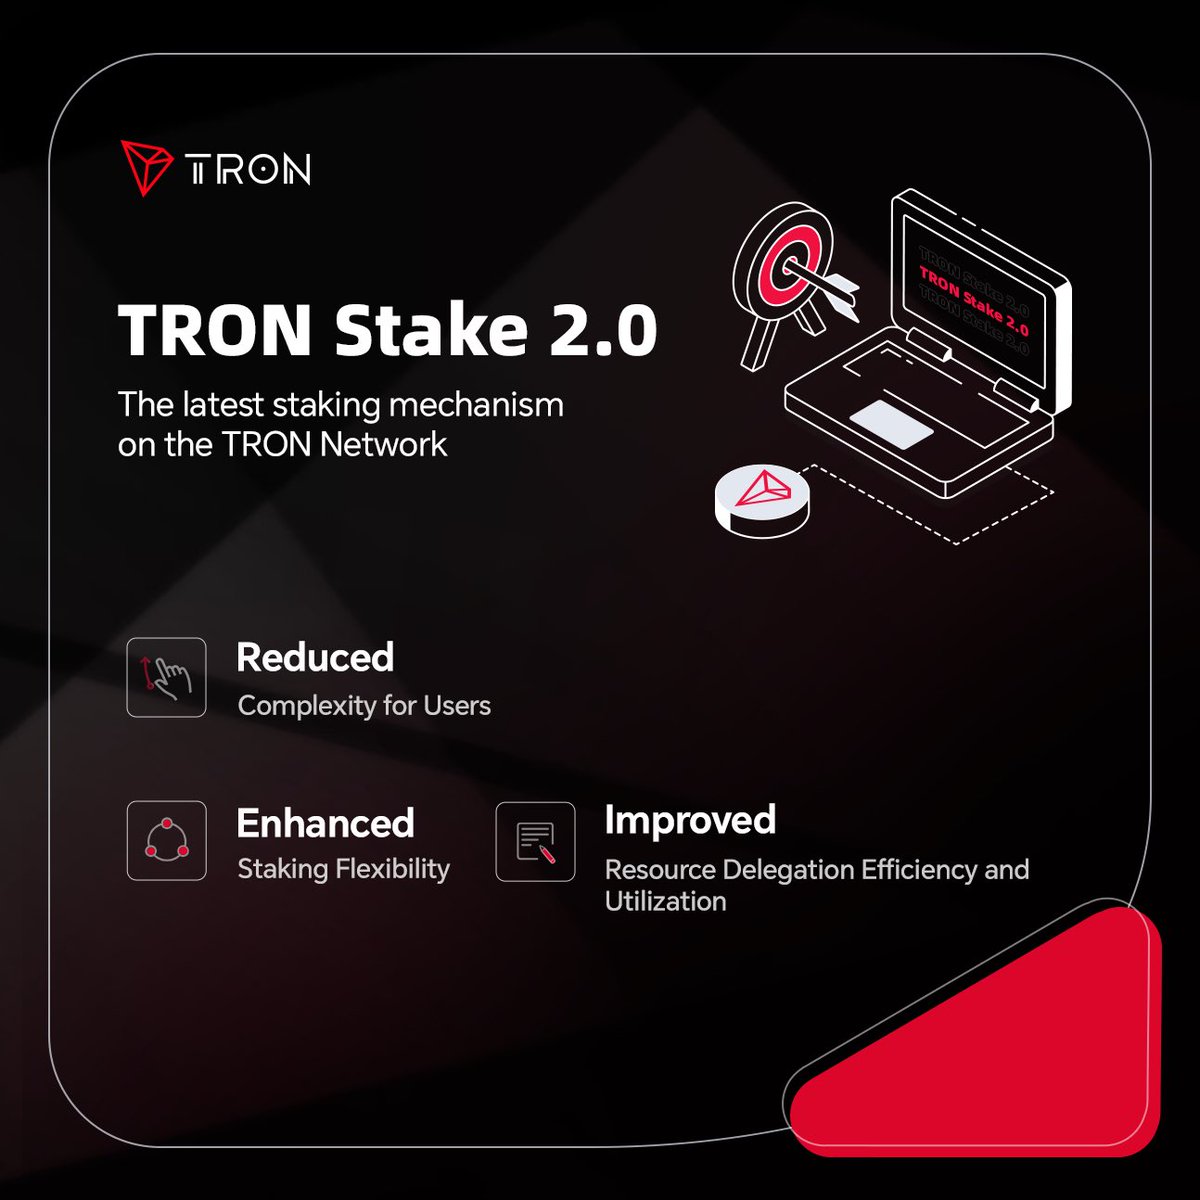 #TRONICS, ready to build the future on TRON? TRON Stake 2.0 offers streamlined infrastructure and enhanced resource management to power your projects. Let's unlock new potential within the #TRON ecosystem! 👇